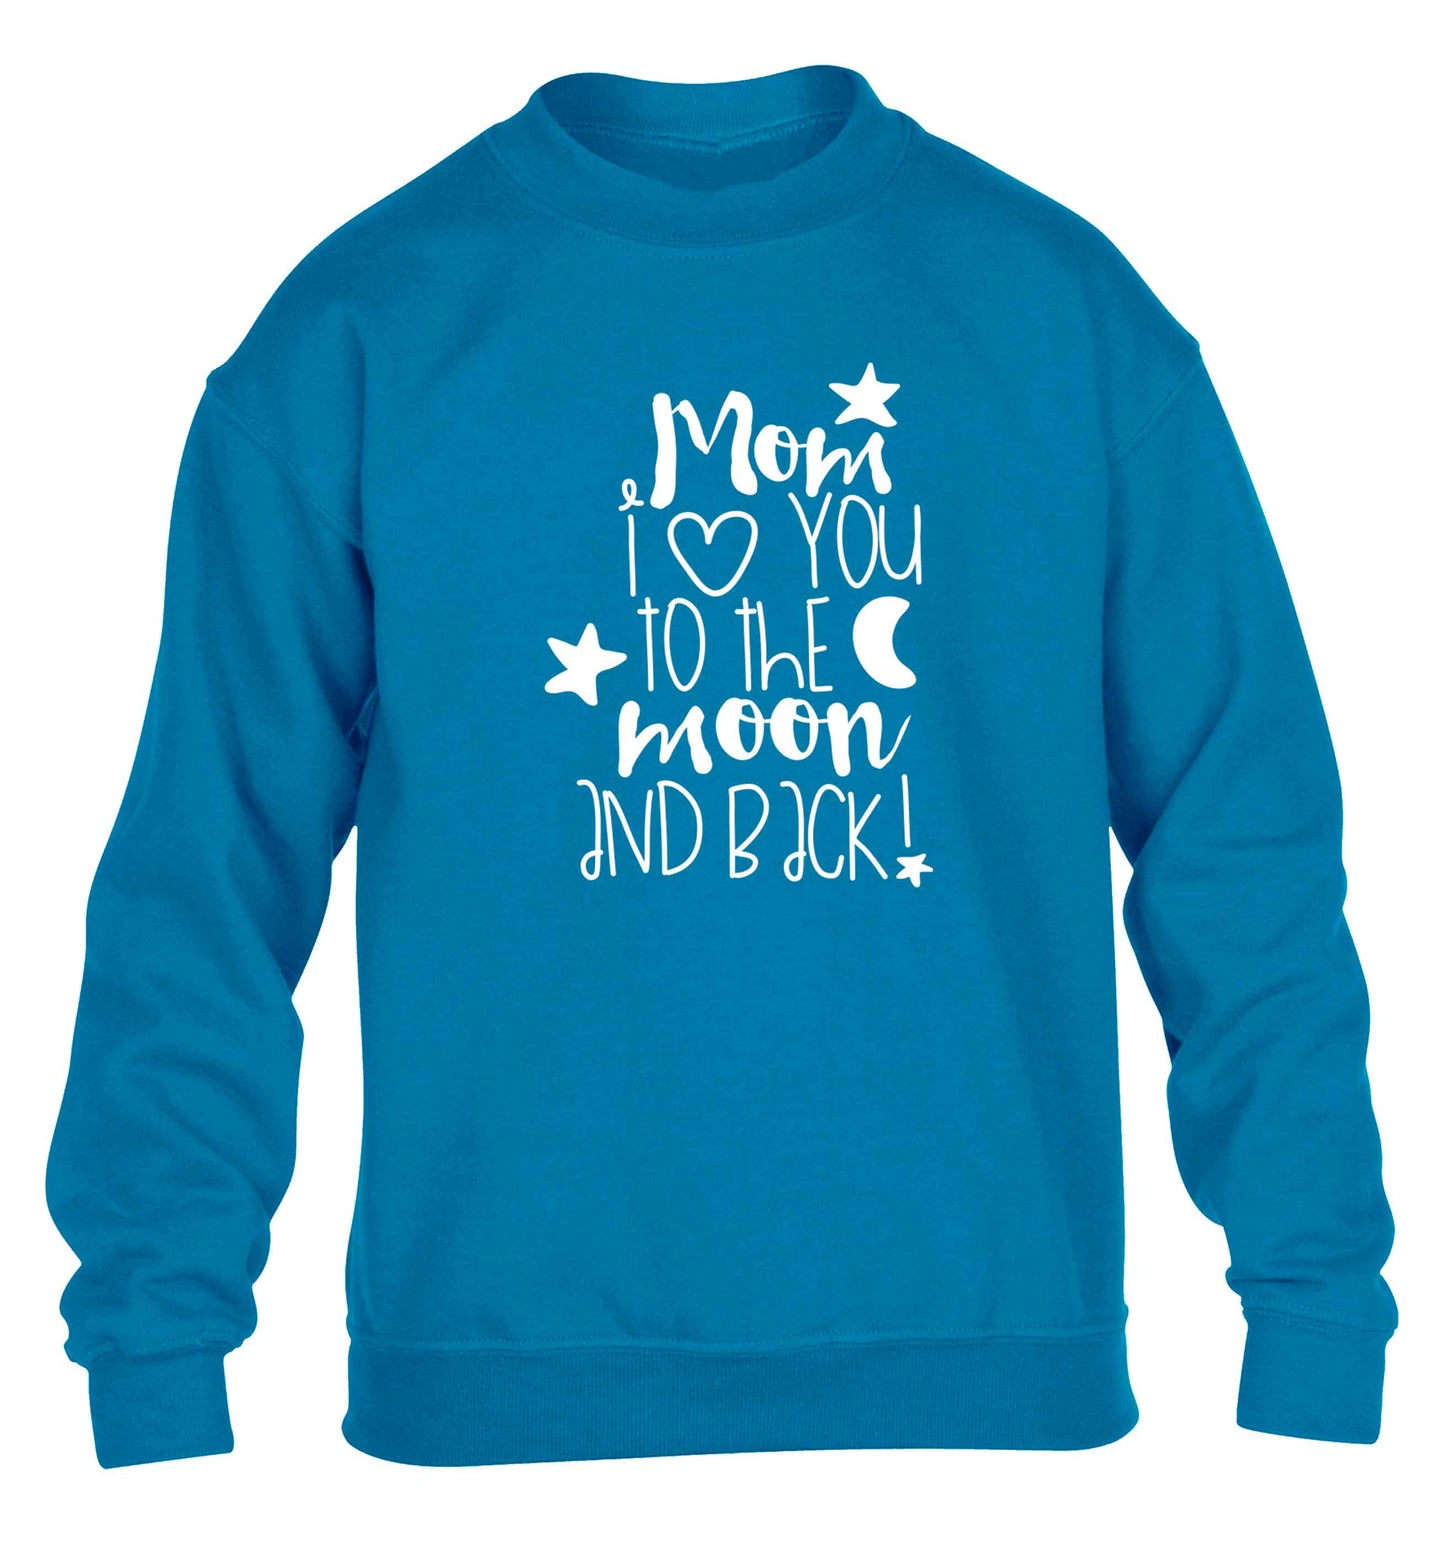 Mom I love you to the moon and back children's blue sweater 12-13 Years